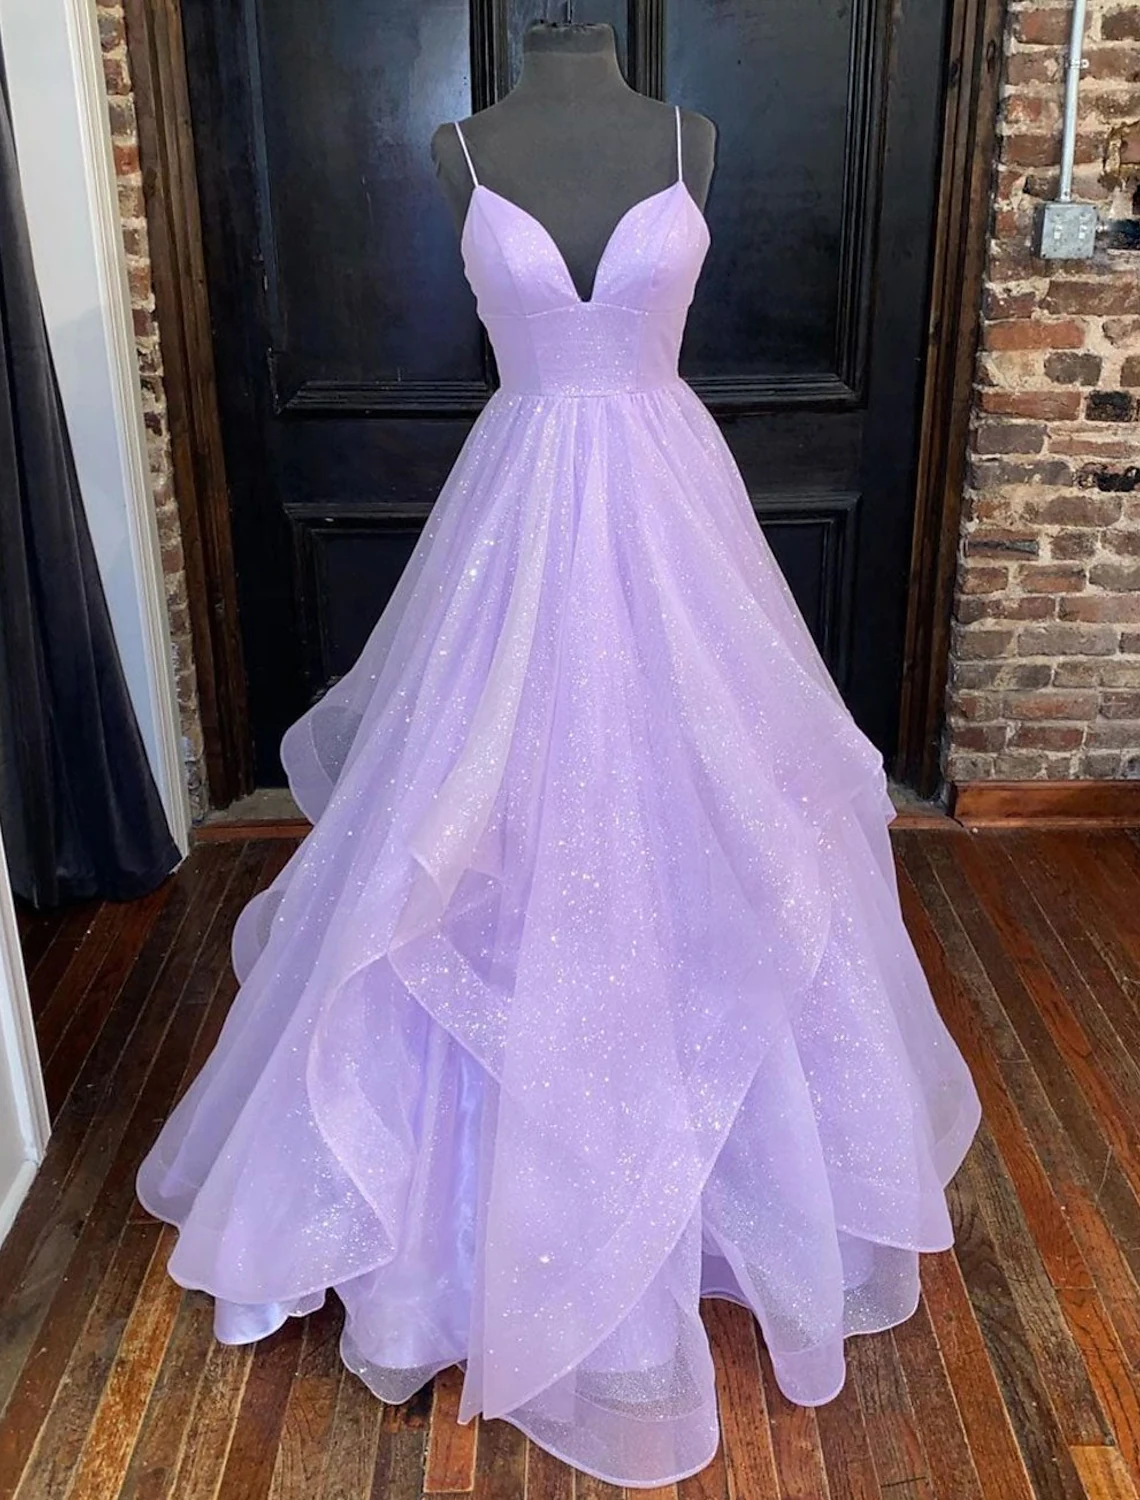 Ball Gown A-Line Prom Dresses Sparkle & Shine Dress Formal Floor Length Sleeveless Sweetheart Tulle Backless with Pleats Ruffles